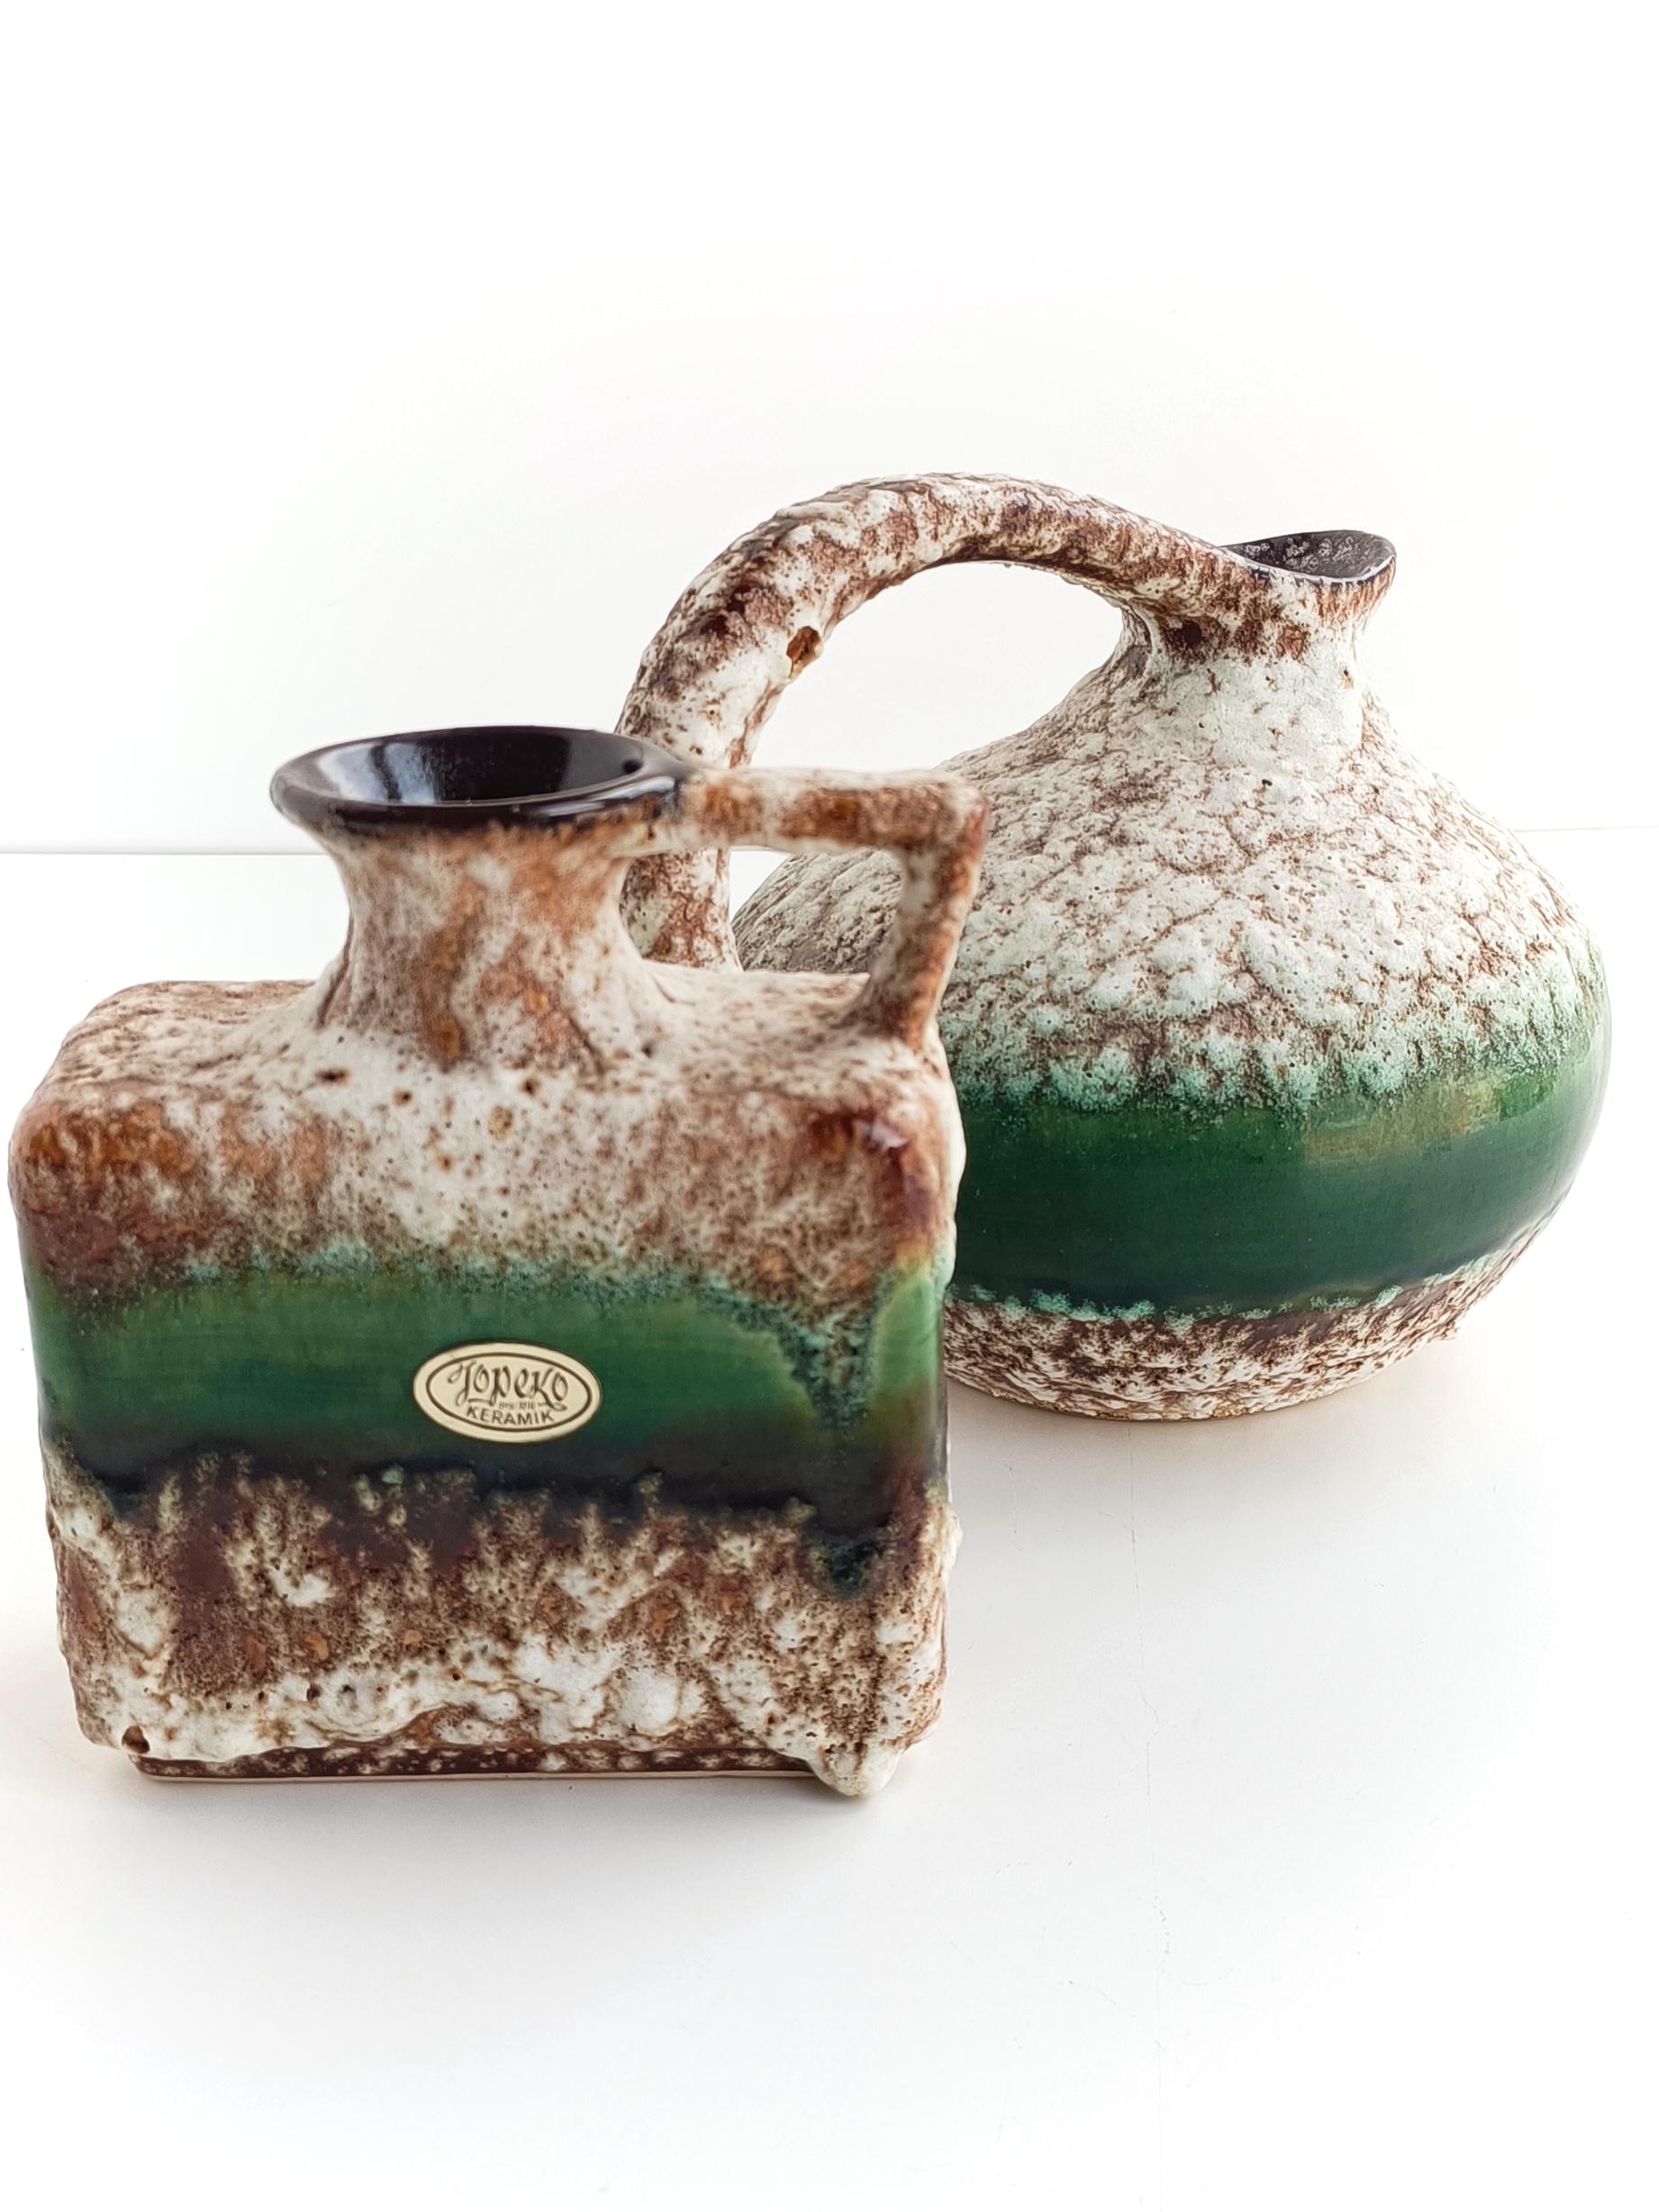 These Mid-century modern ceramic jugs by Prag Grün for Jopeko Keramik are highly sought after pieces among collectors of vintage ceramics. Hand-produced in West Germany circa the 1960s, these jugs represent a distinctive style characterized by bold,